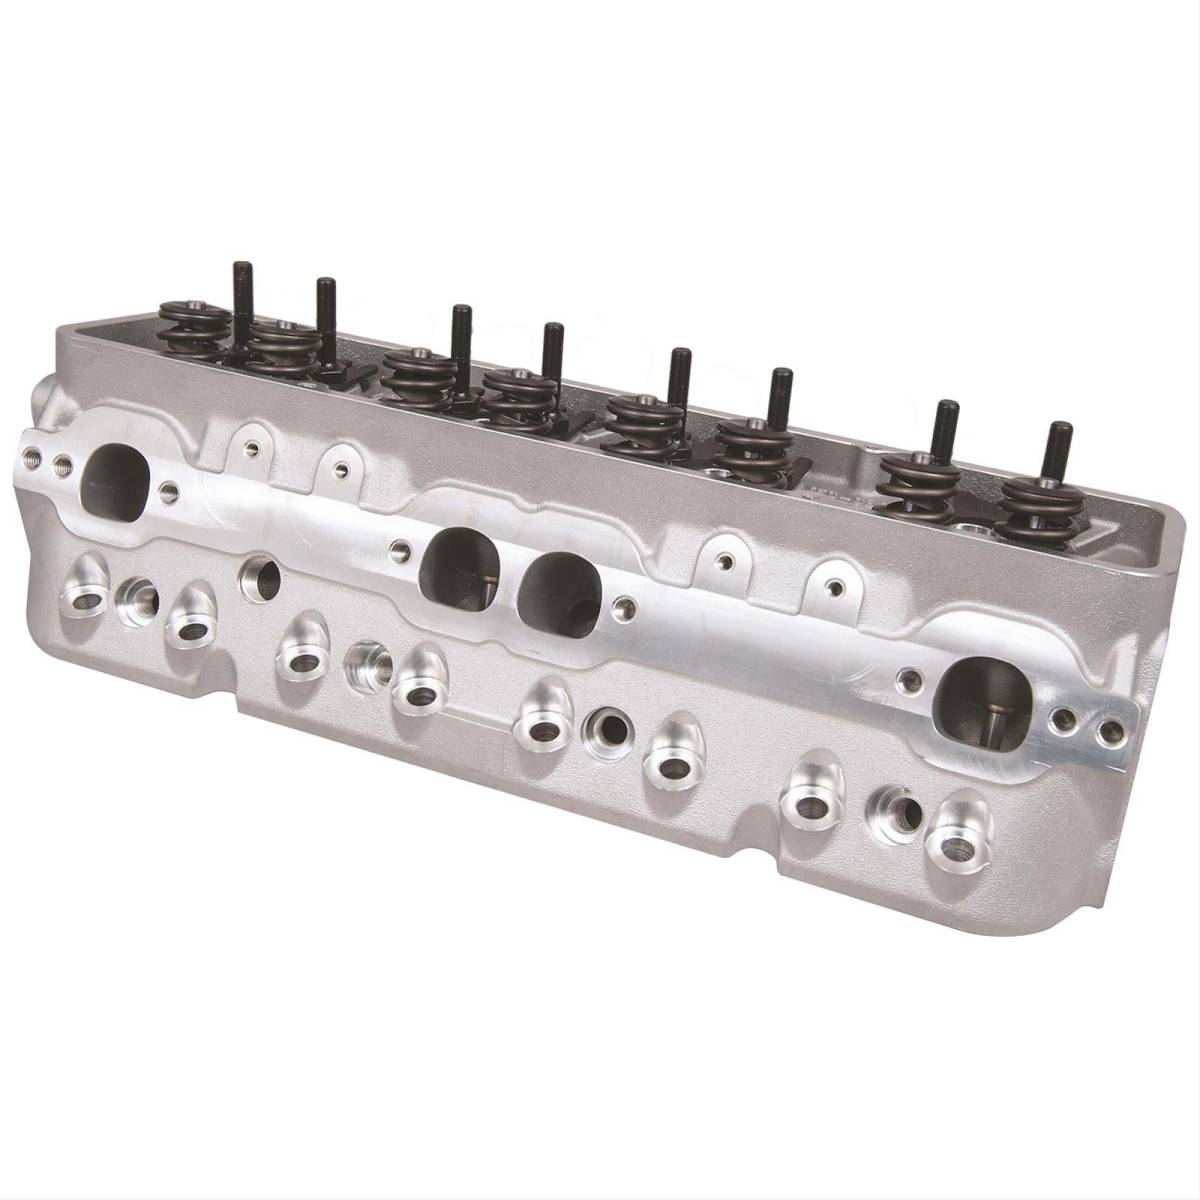 Trickflow - Trickflow Super 23 Cylinder Heads, SB Chevy, 195cc Intake, 62cc Chambers, 1.460" Dual Springs, Center Bolt - Image 1